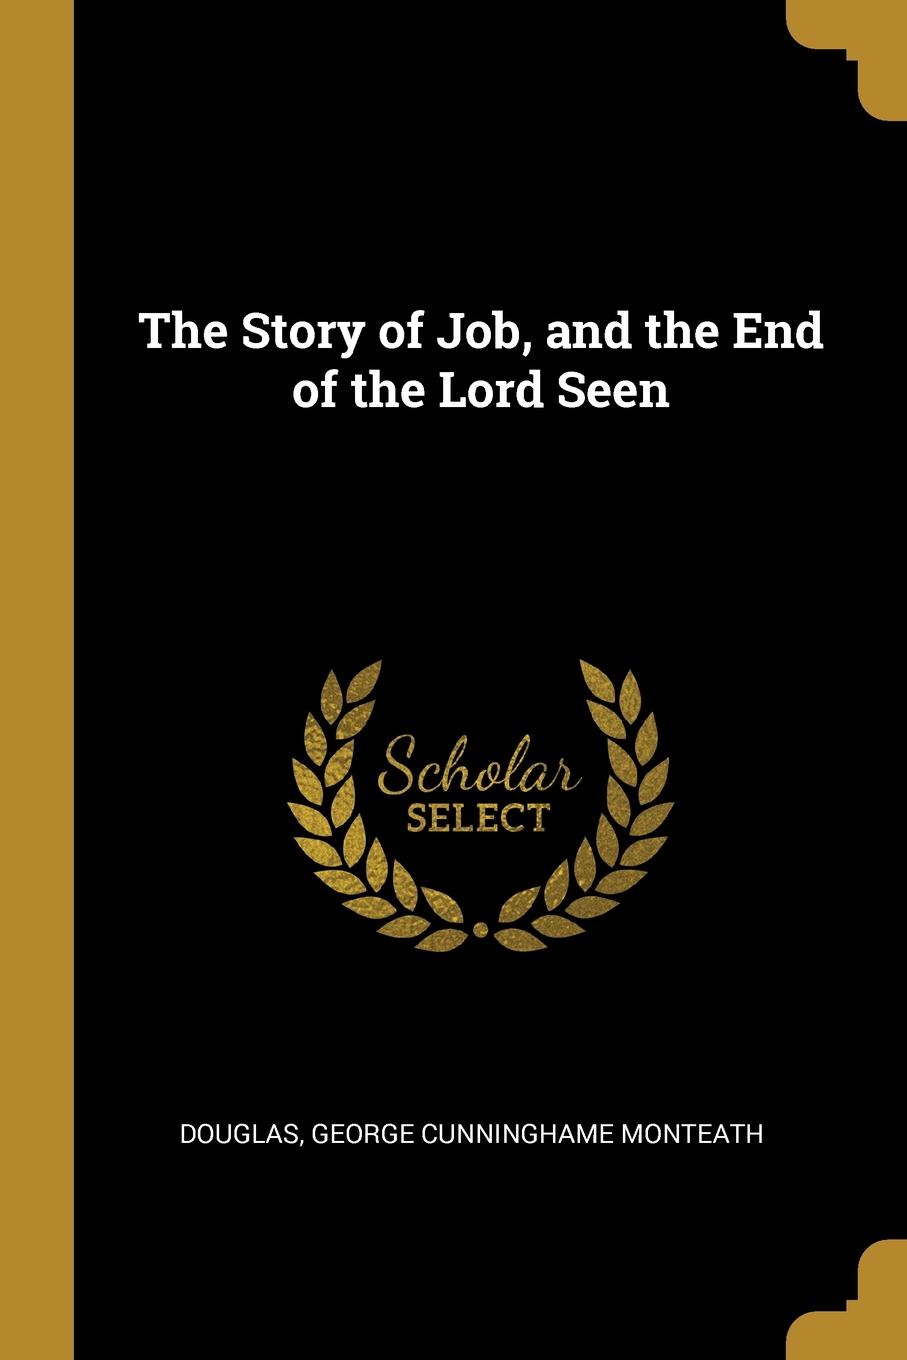 The Story of Job, and the End of the Lord Seen